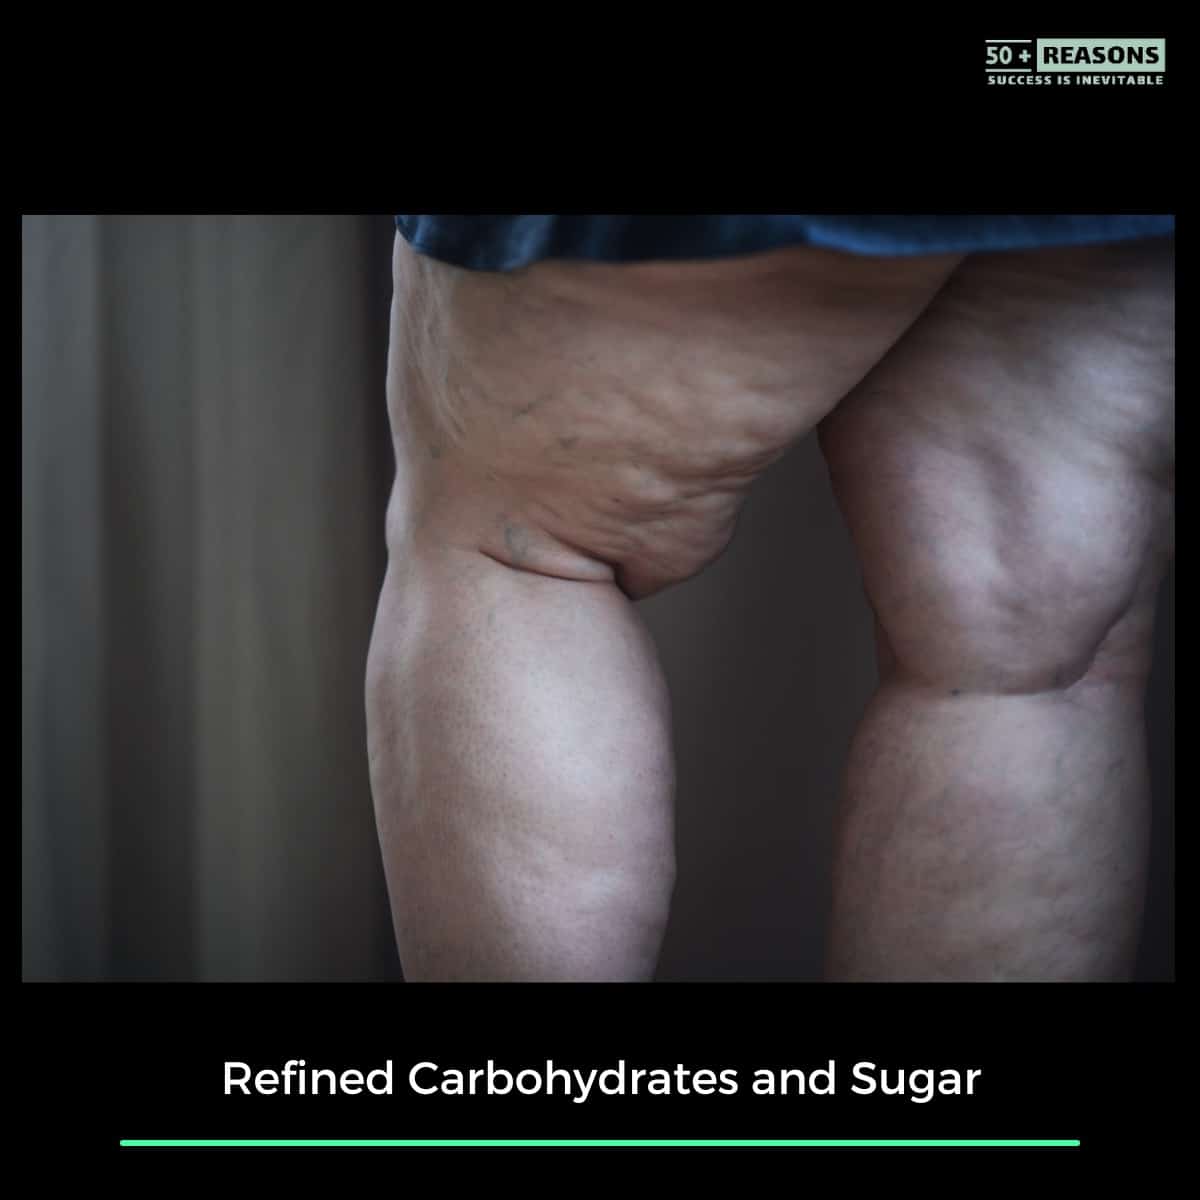 Refined Carbohydrates and Sugar